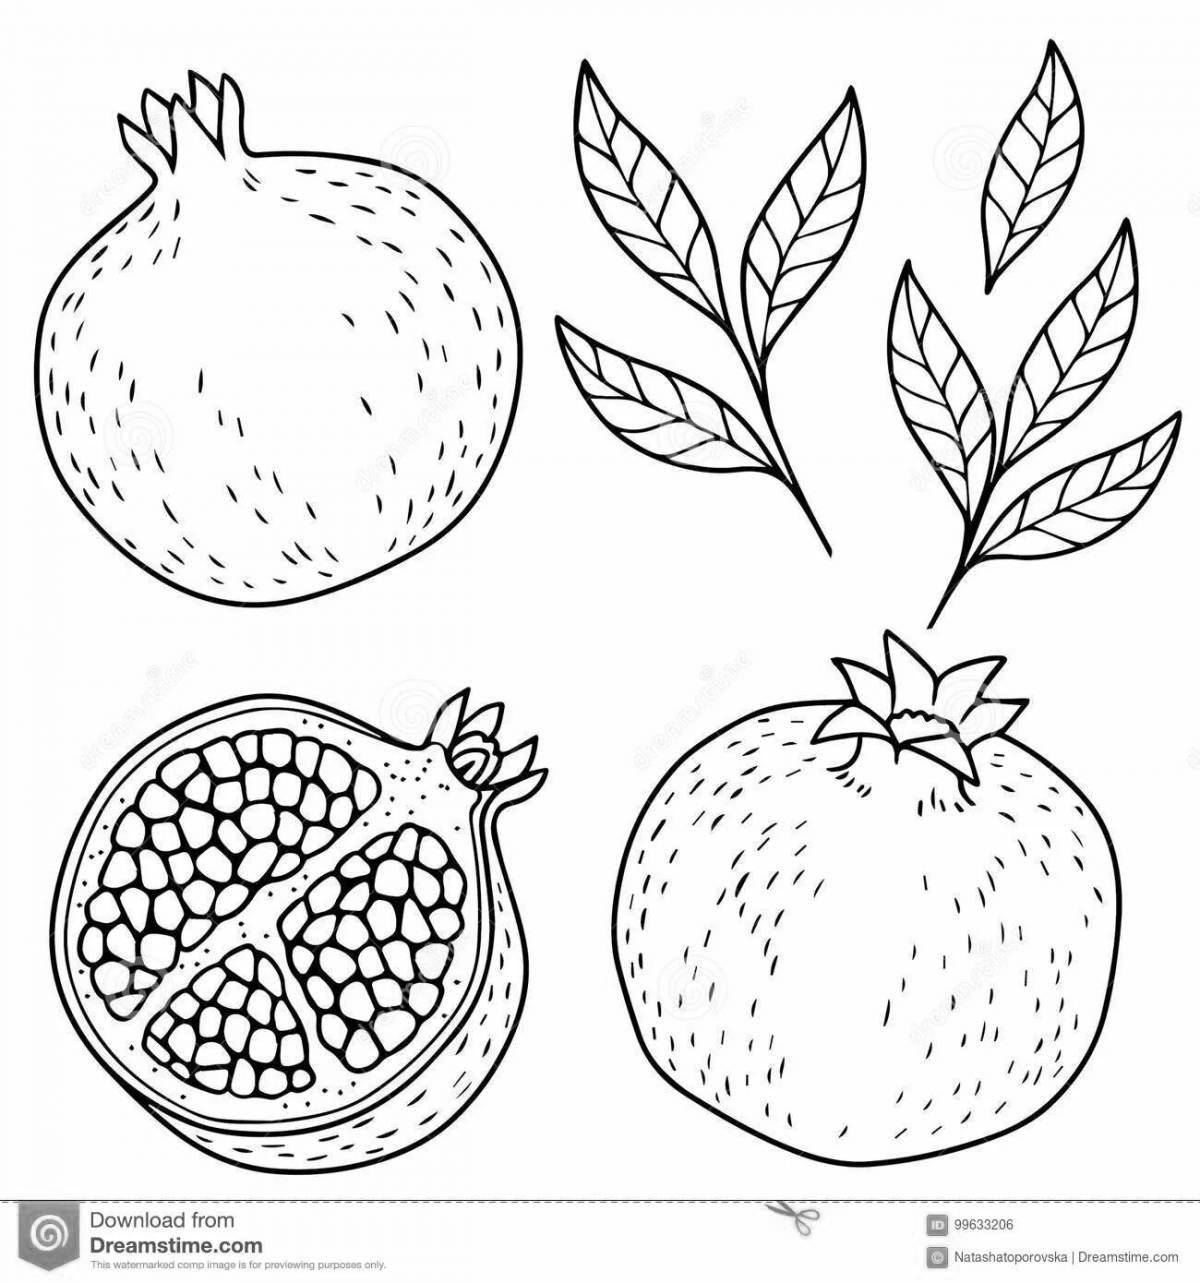 Great pomegranate coloring book for kids